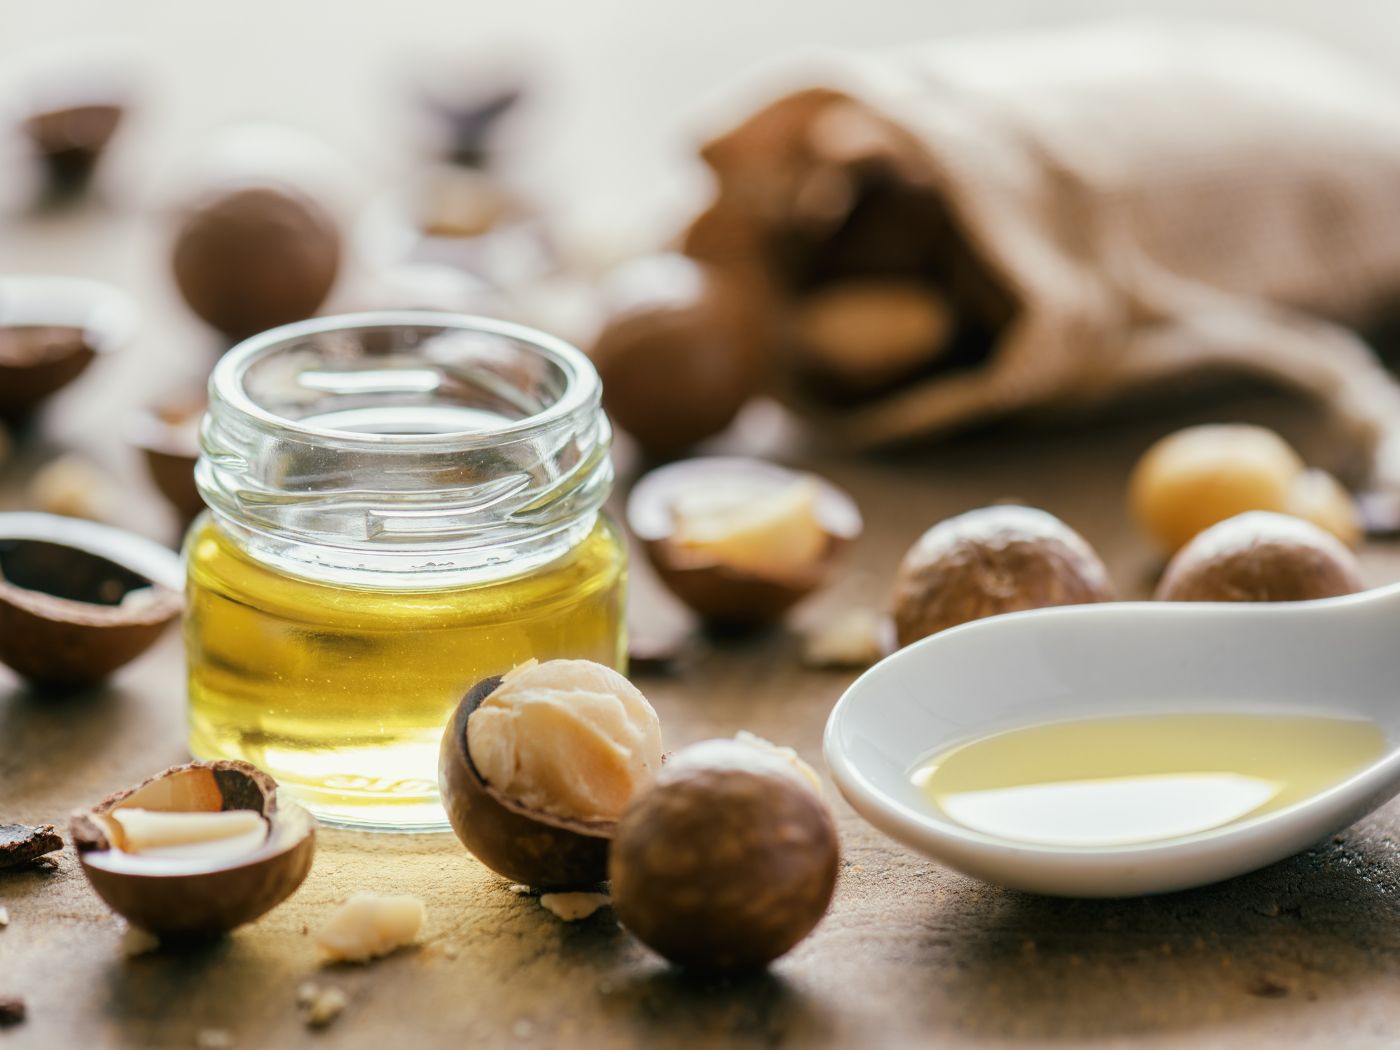 10 Benefits Of Macadamia Nut Oil That No One Told You About